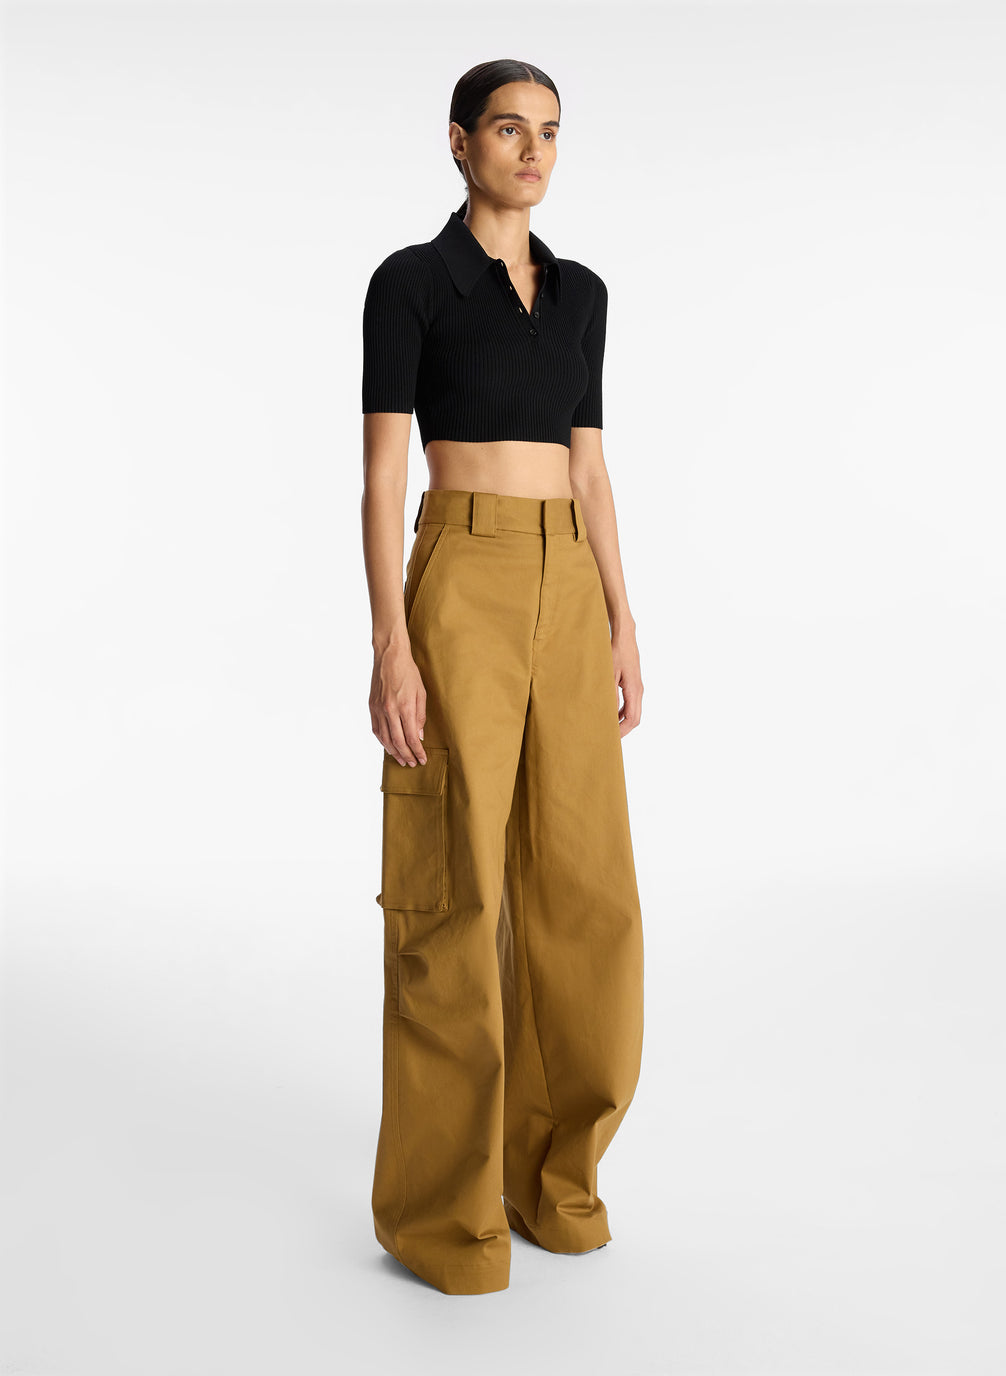 side view of woman wearing black cropped collared knit shirt and tan cargo pants